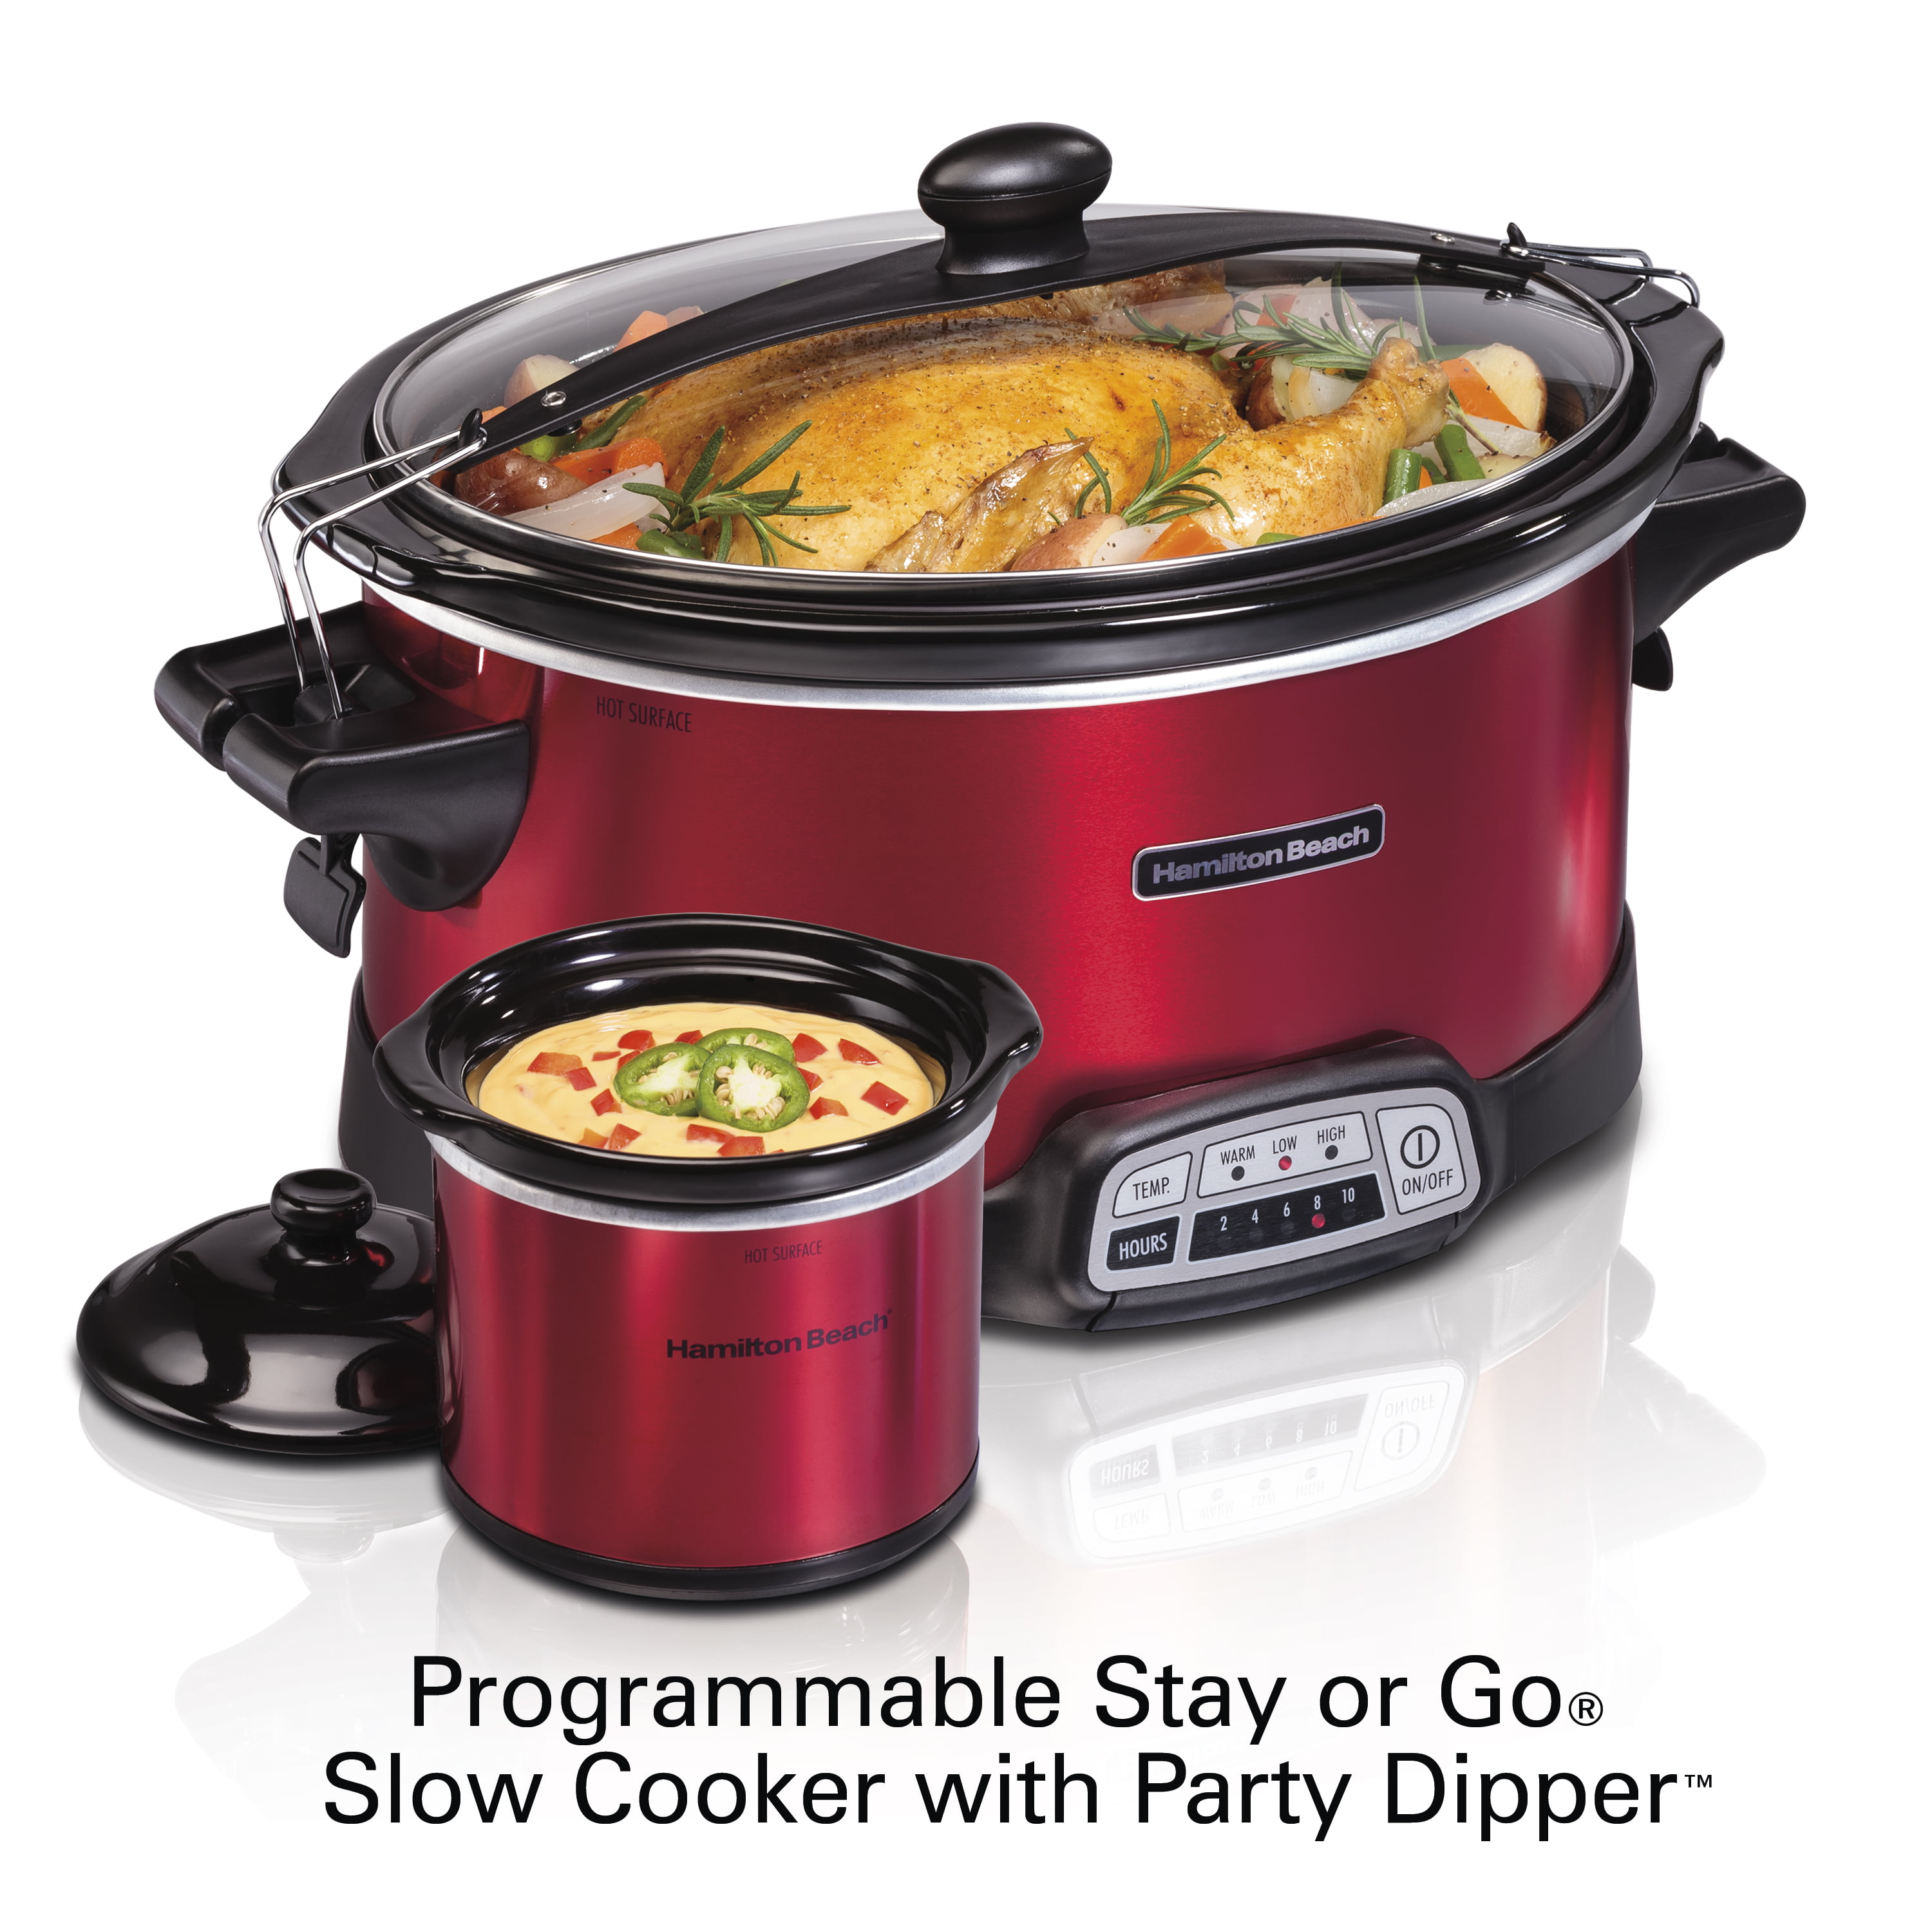 Hamilton Beach 7 Quart Stay or Go Programmable Slow Cooker with Party Dipper 